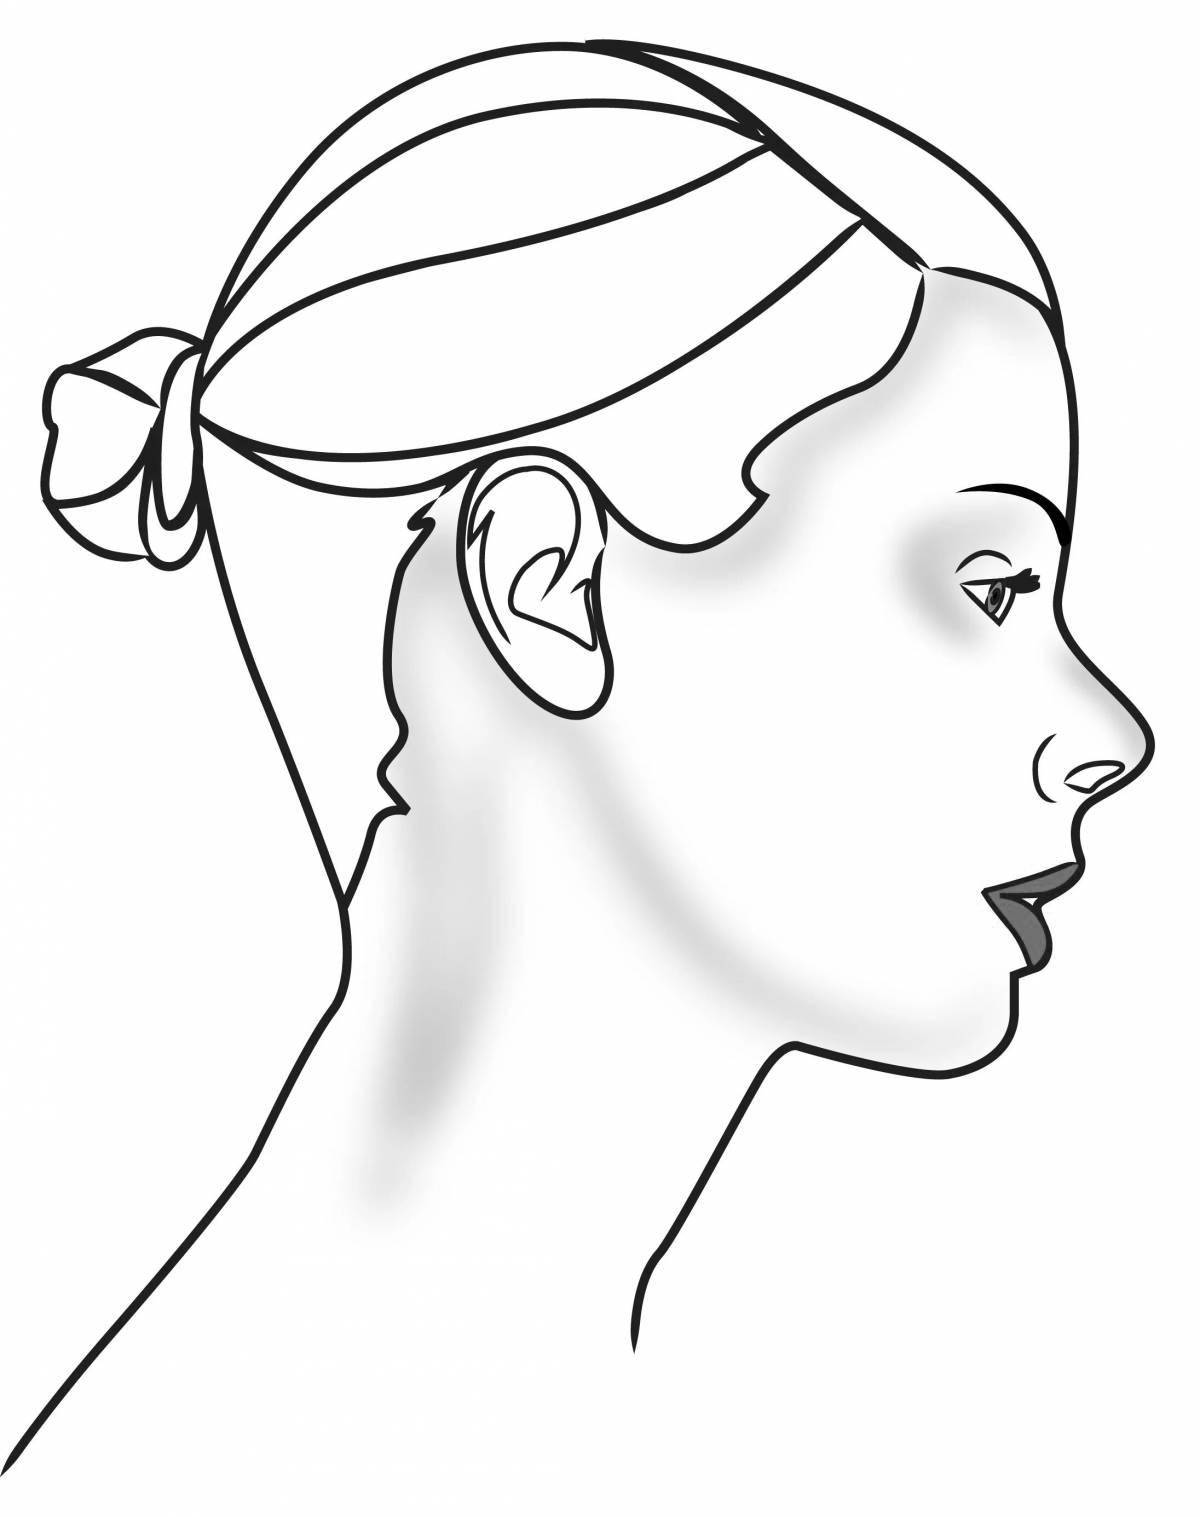 Upbeat face coloring page